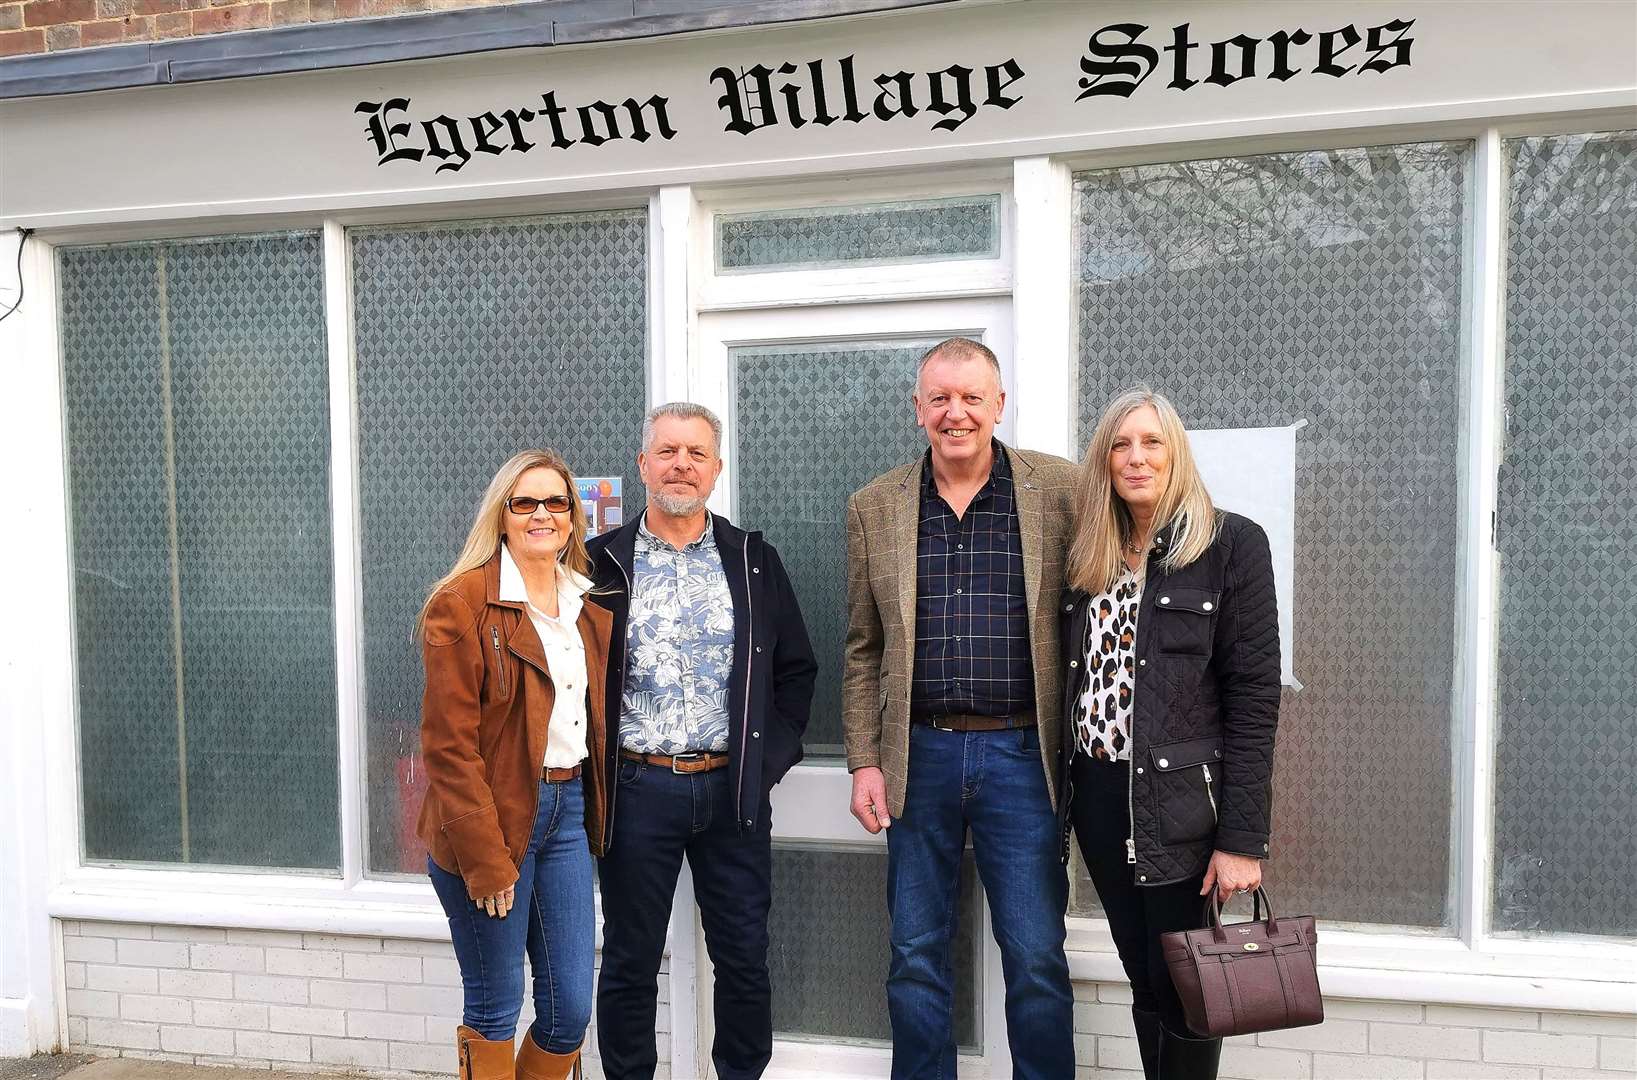 Business partners Royce Parker and Stephen Bentley outside the Egerton Village Store that is set to open next month